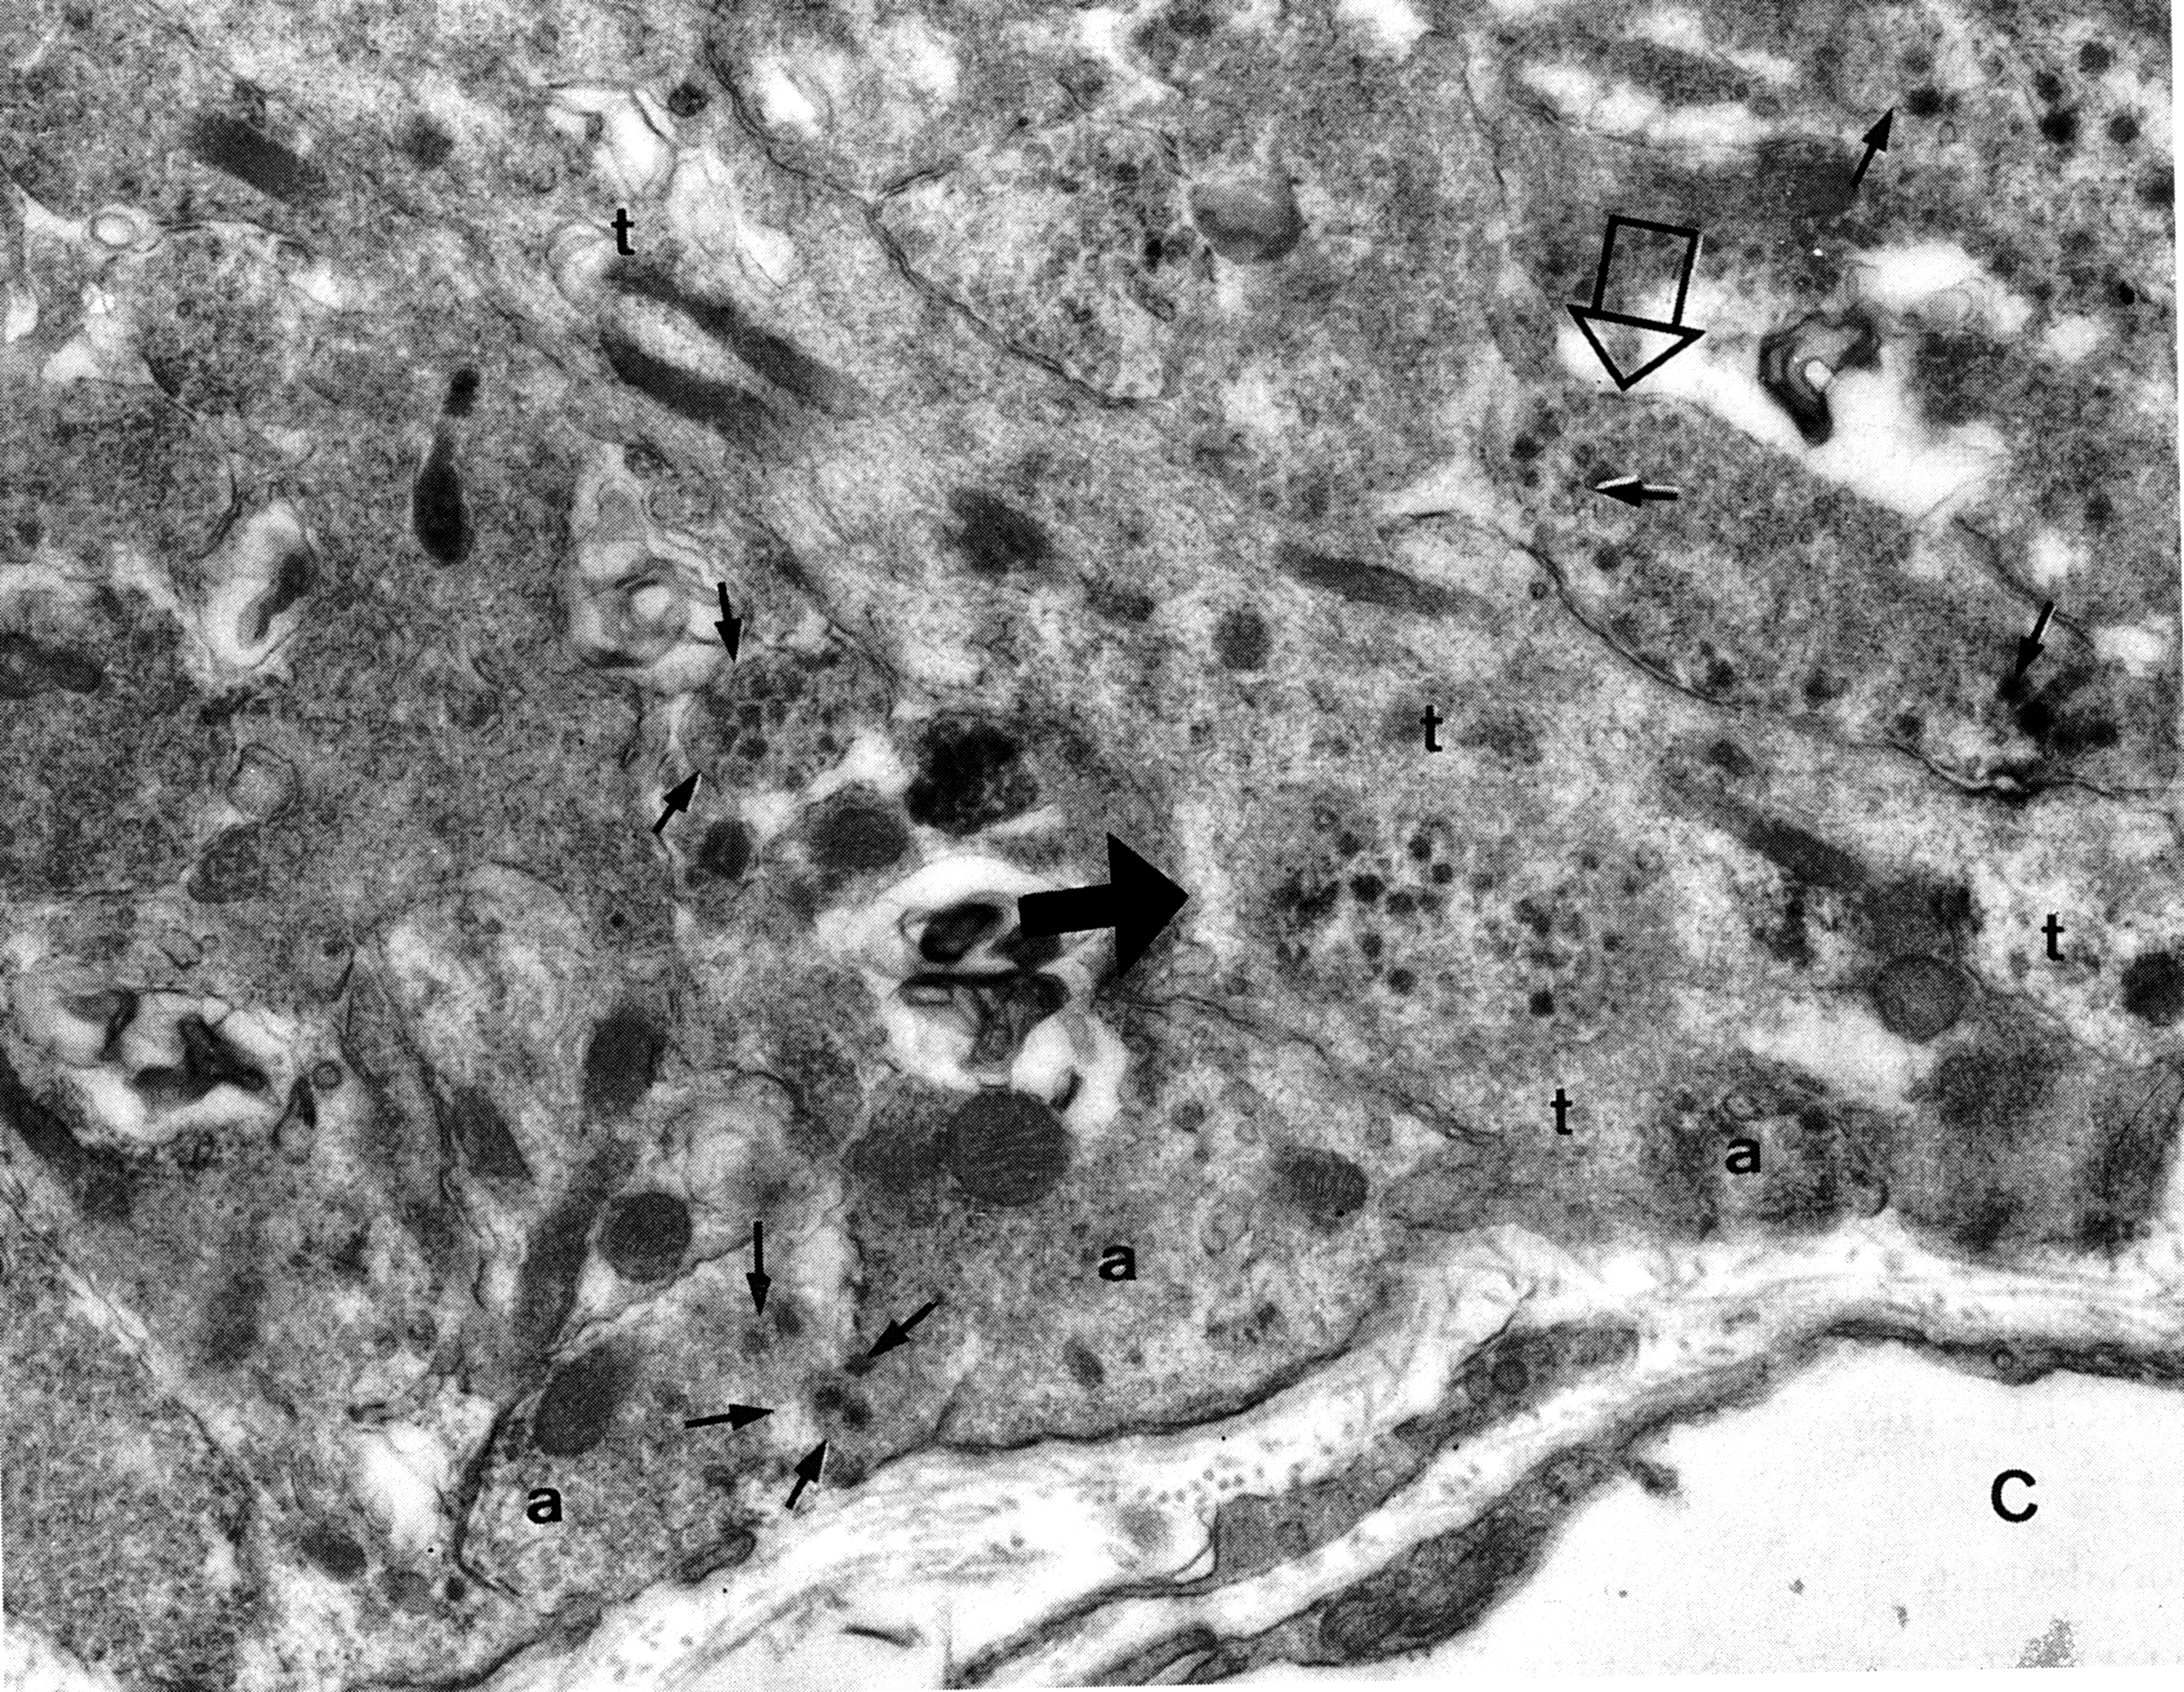 Fig. 21. Electron micrograph of the external zone of the median eminence showing the presence of axon terminals (a) and a tanycyte process (t) adjacent to a fenestrated capillary (C) of the portal plexus. One axon (closed arrowhead) has been engulfed by the tanycyte and another (open arrowhead) is separated from the portal capillary space by the tanycyte foot process. Note presence of dense core vesicles (arrows) as well as smaller secretory vesicles in several axon terminals. (From Lechan RM, Functional Microanatomy of the Hypophysial-Pituitary Axis, in Melmed, S (Ed), Oncogenesis and Molecular Biology of Pituitary Tumors, Frontiers of Hormone Research, 20: 2-40, 1996.)